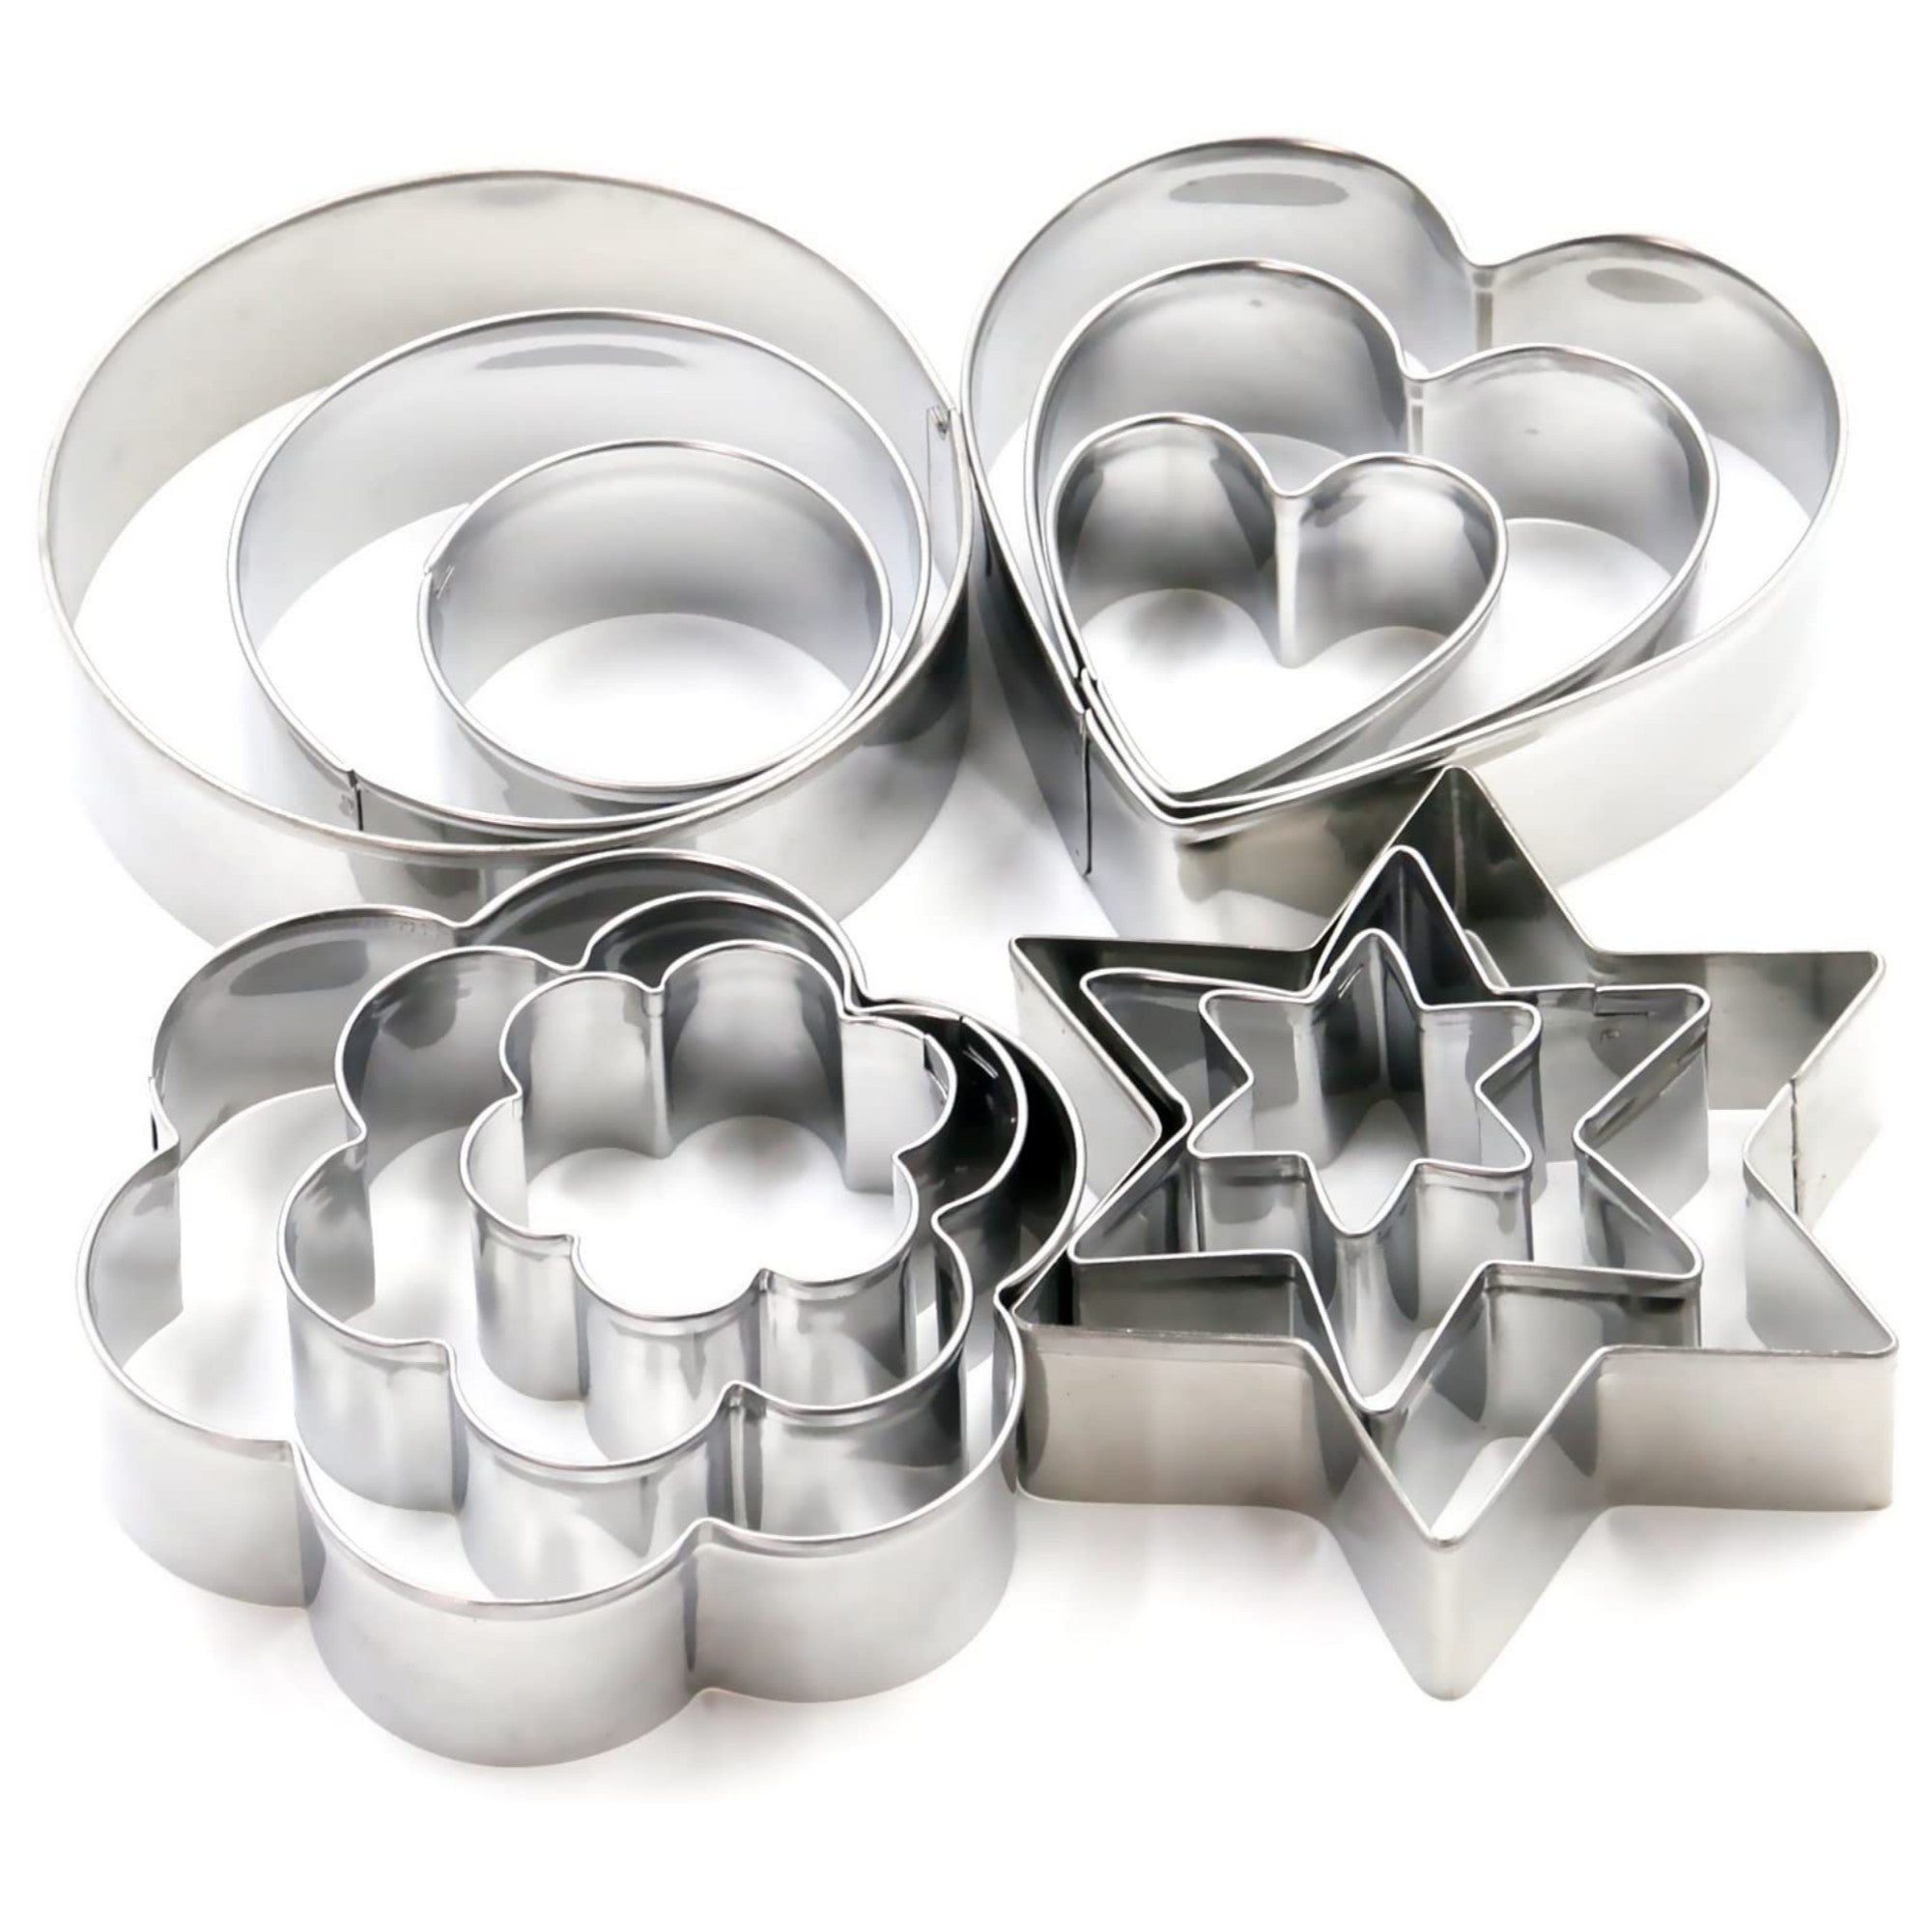 12 Pcs Stainless Steel Cookie Cutter Set of 4 Different Shapes cookie cutters